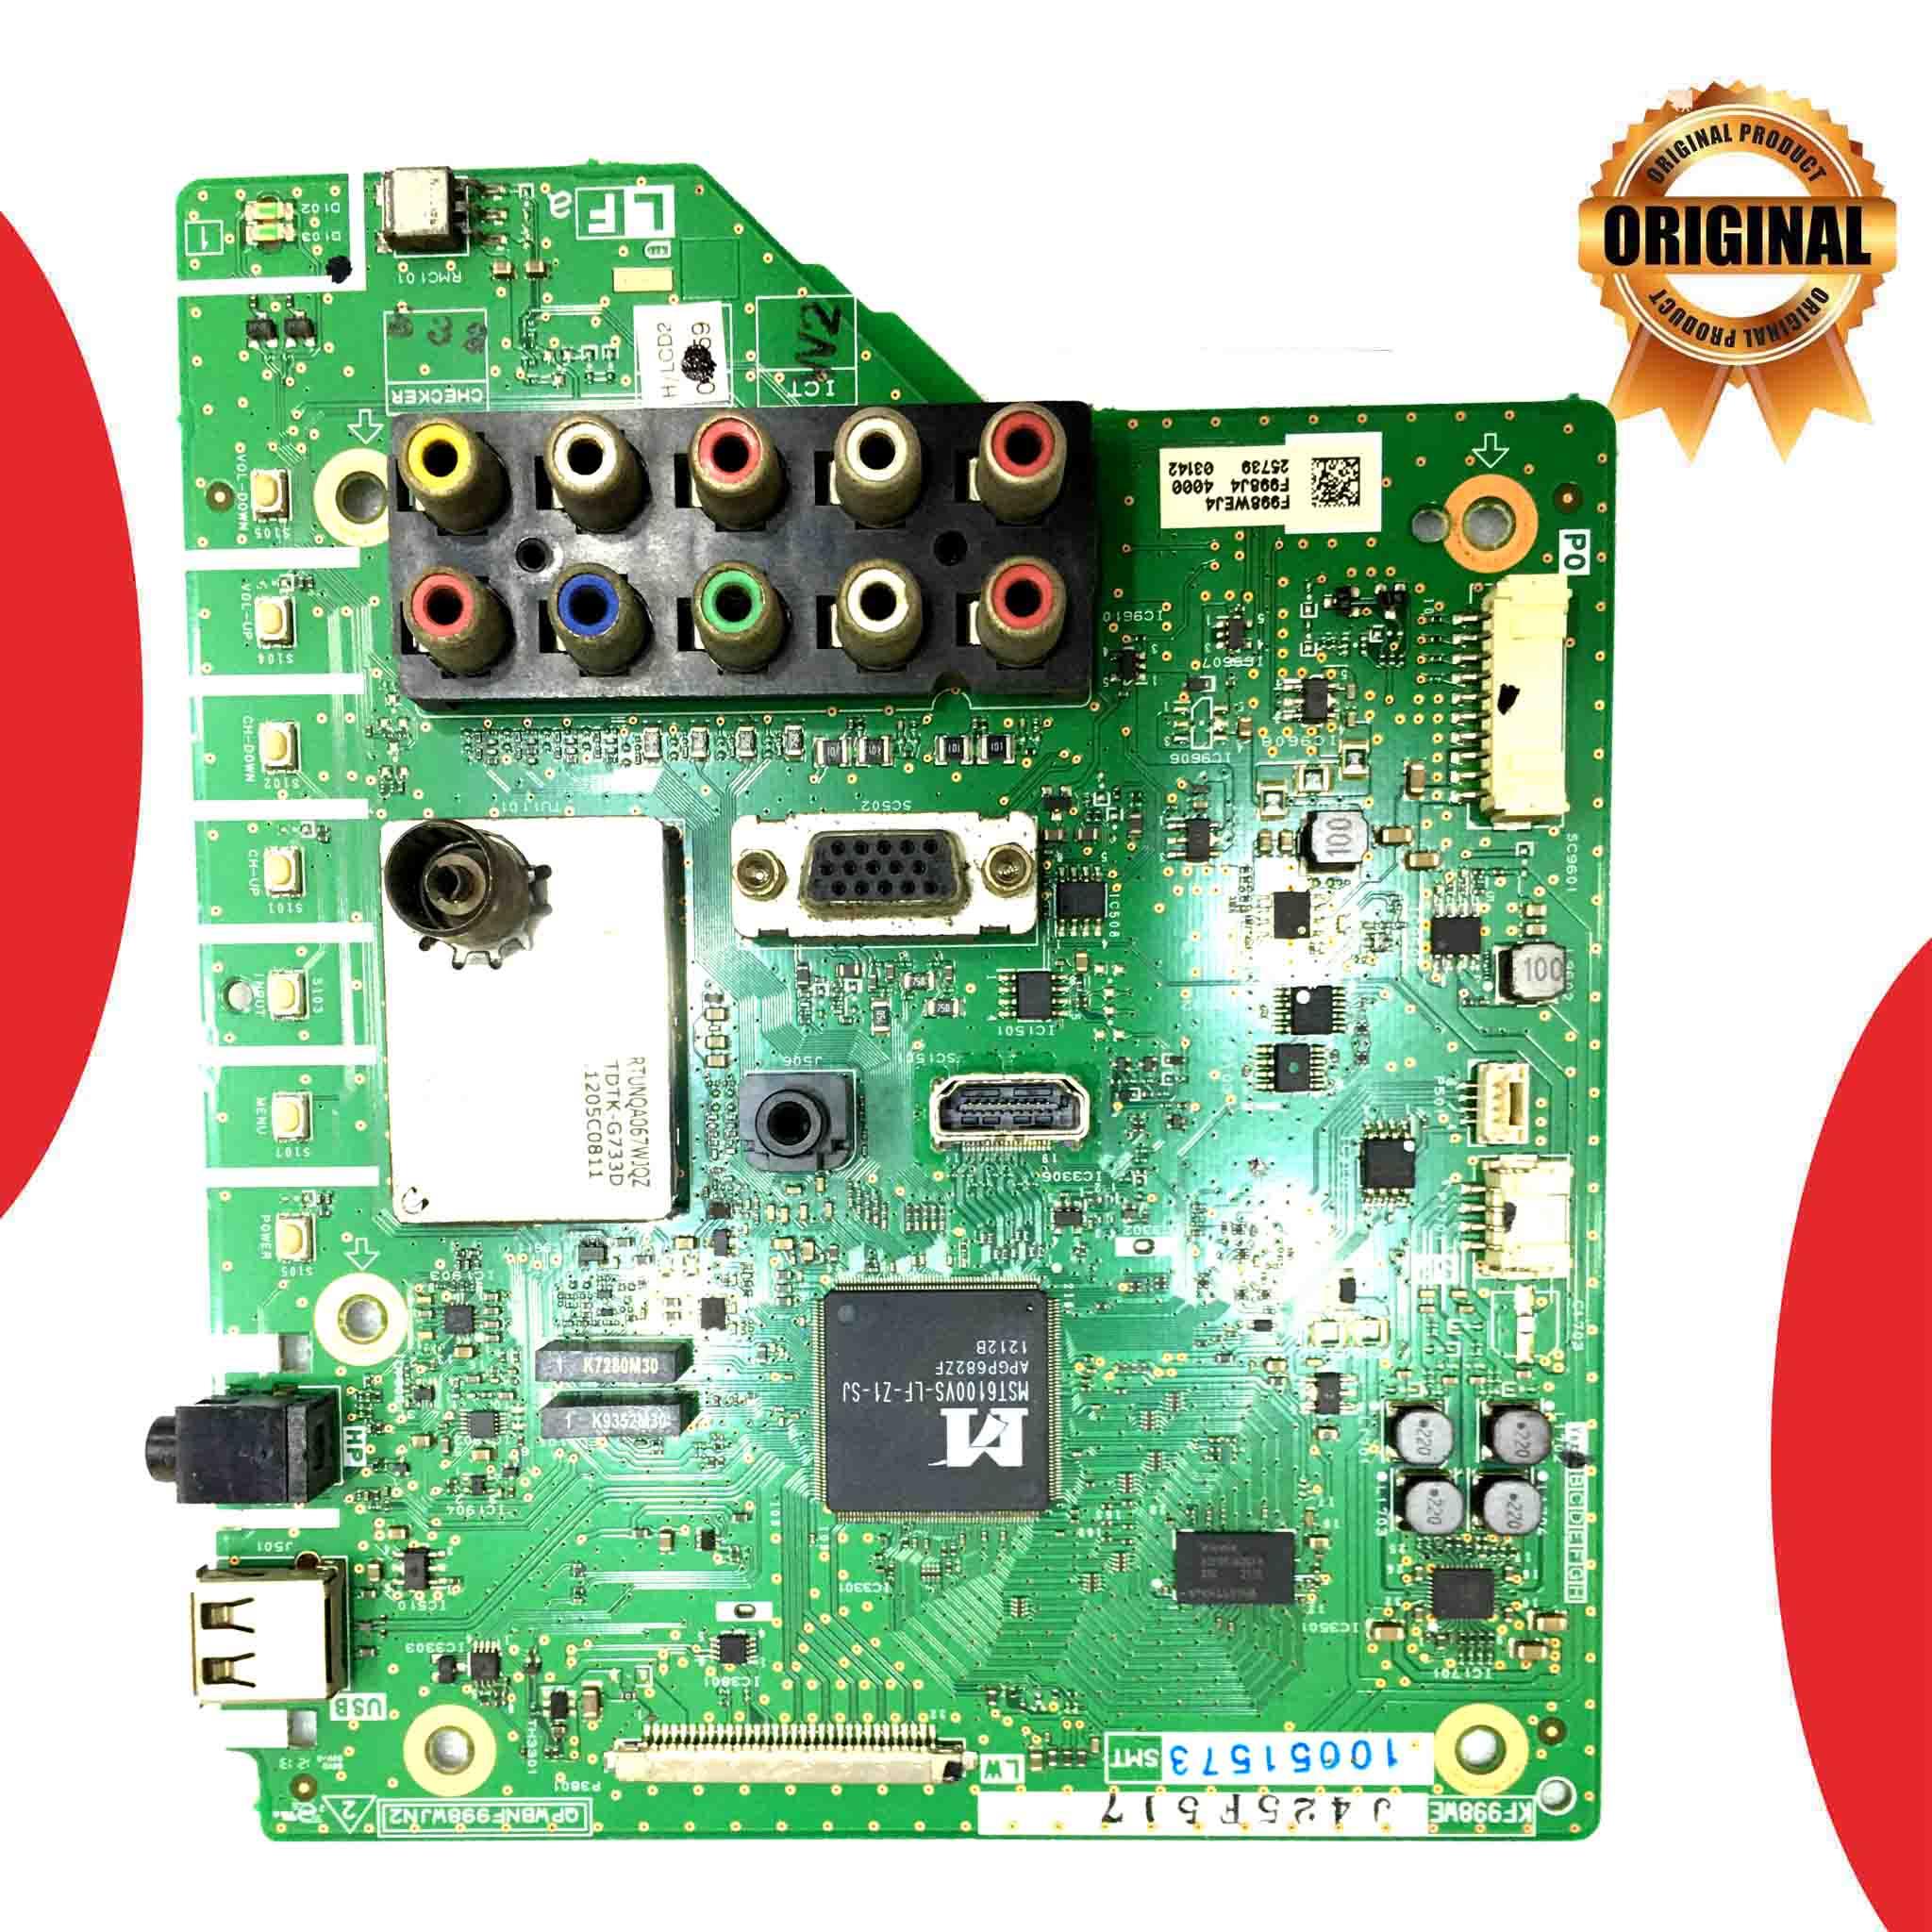 Model 32LE340 Sharp LCD TV Motherboard - Great Bharat Electronics